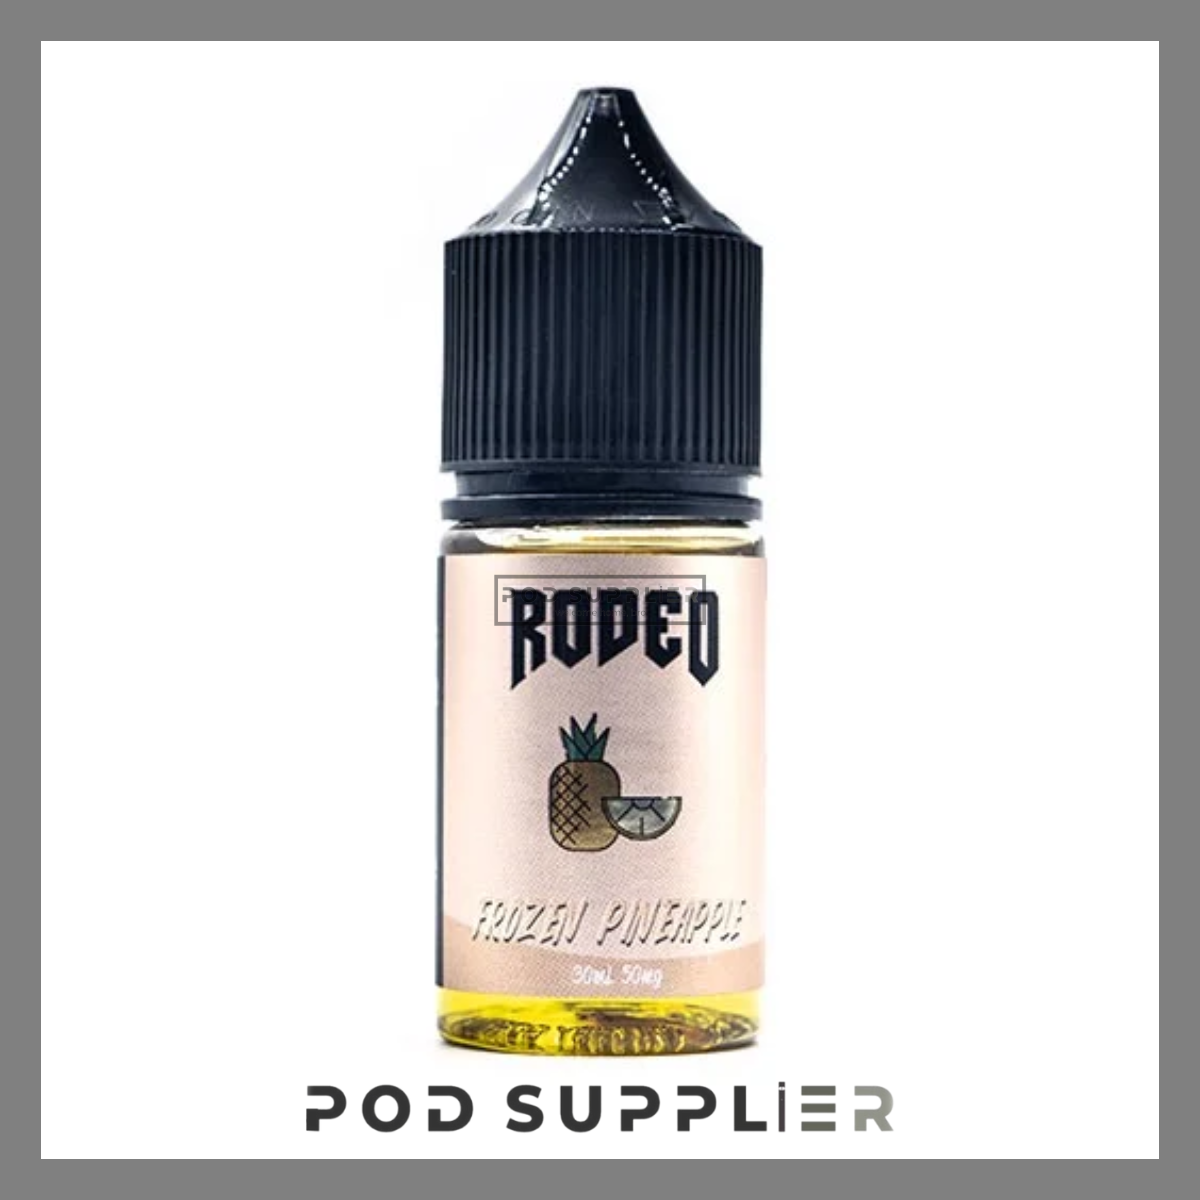  DỨA LẠNH ( FROZEN PINEAPPLE ) by GCORE RODEO Saltnic 30ML 